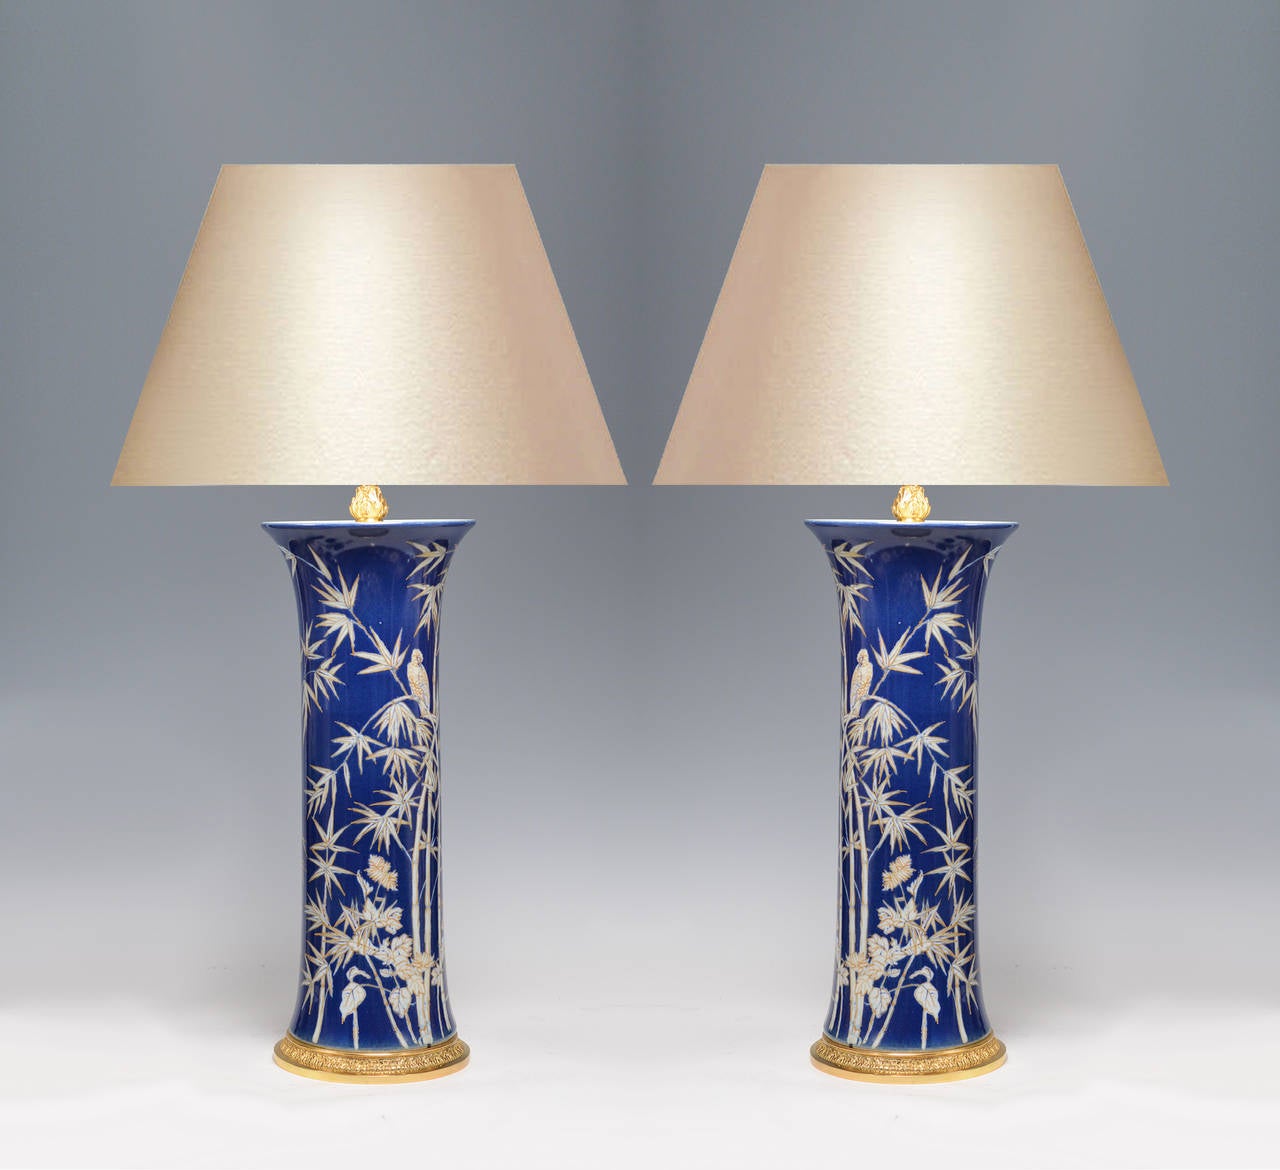 Pair of fine painted blue and white porcelain lamps with bamboo and bird decoration, gilt bases. 21